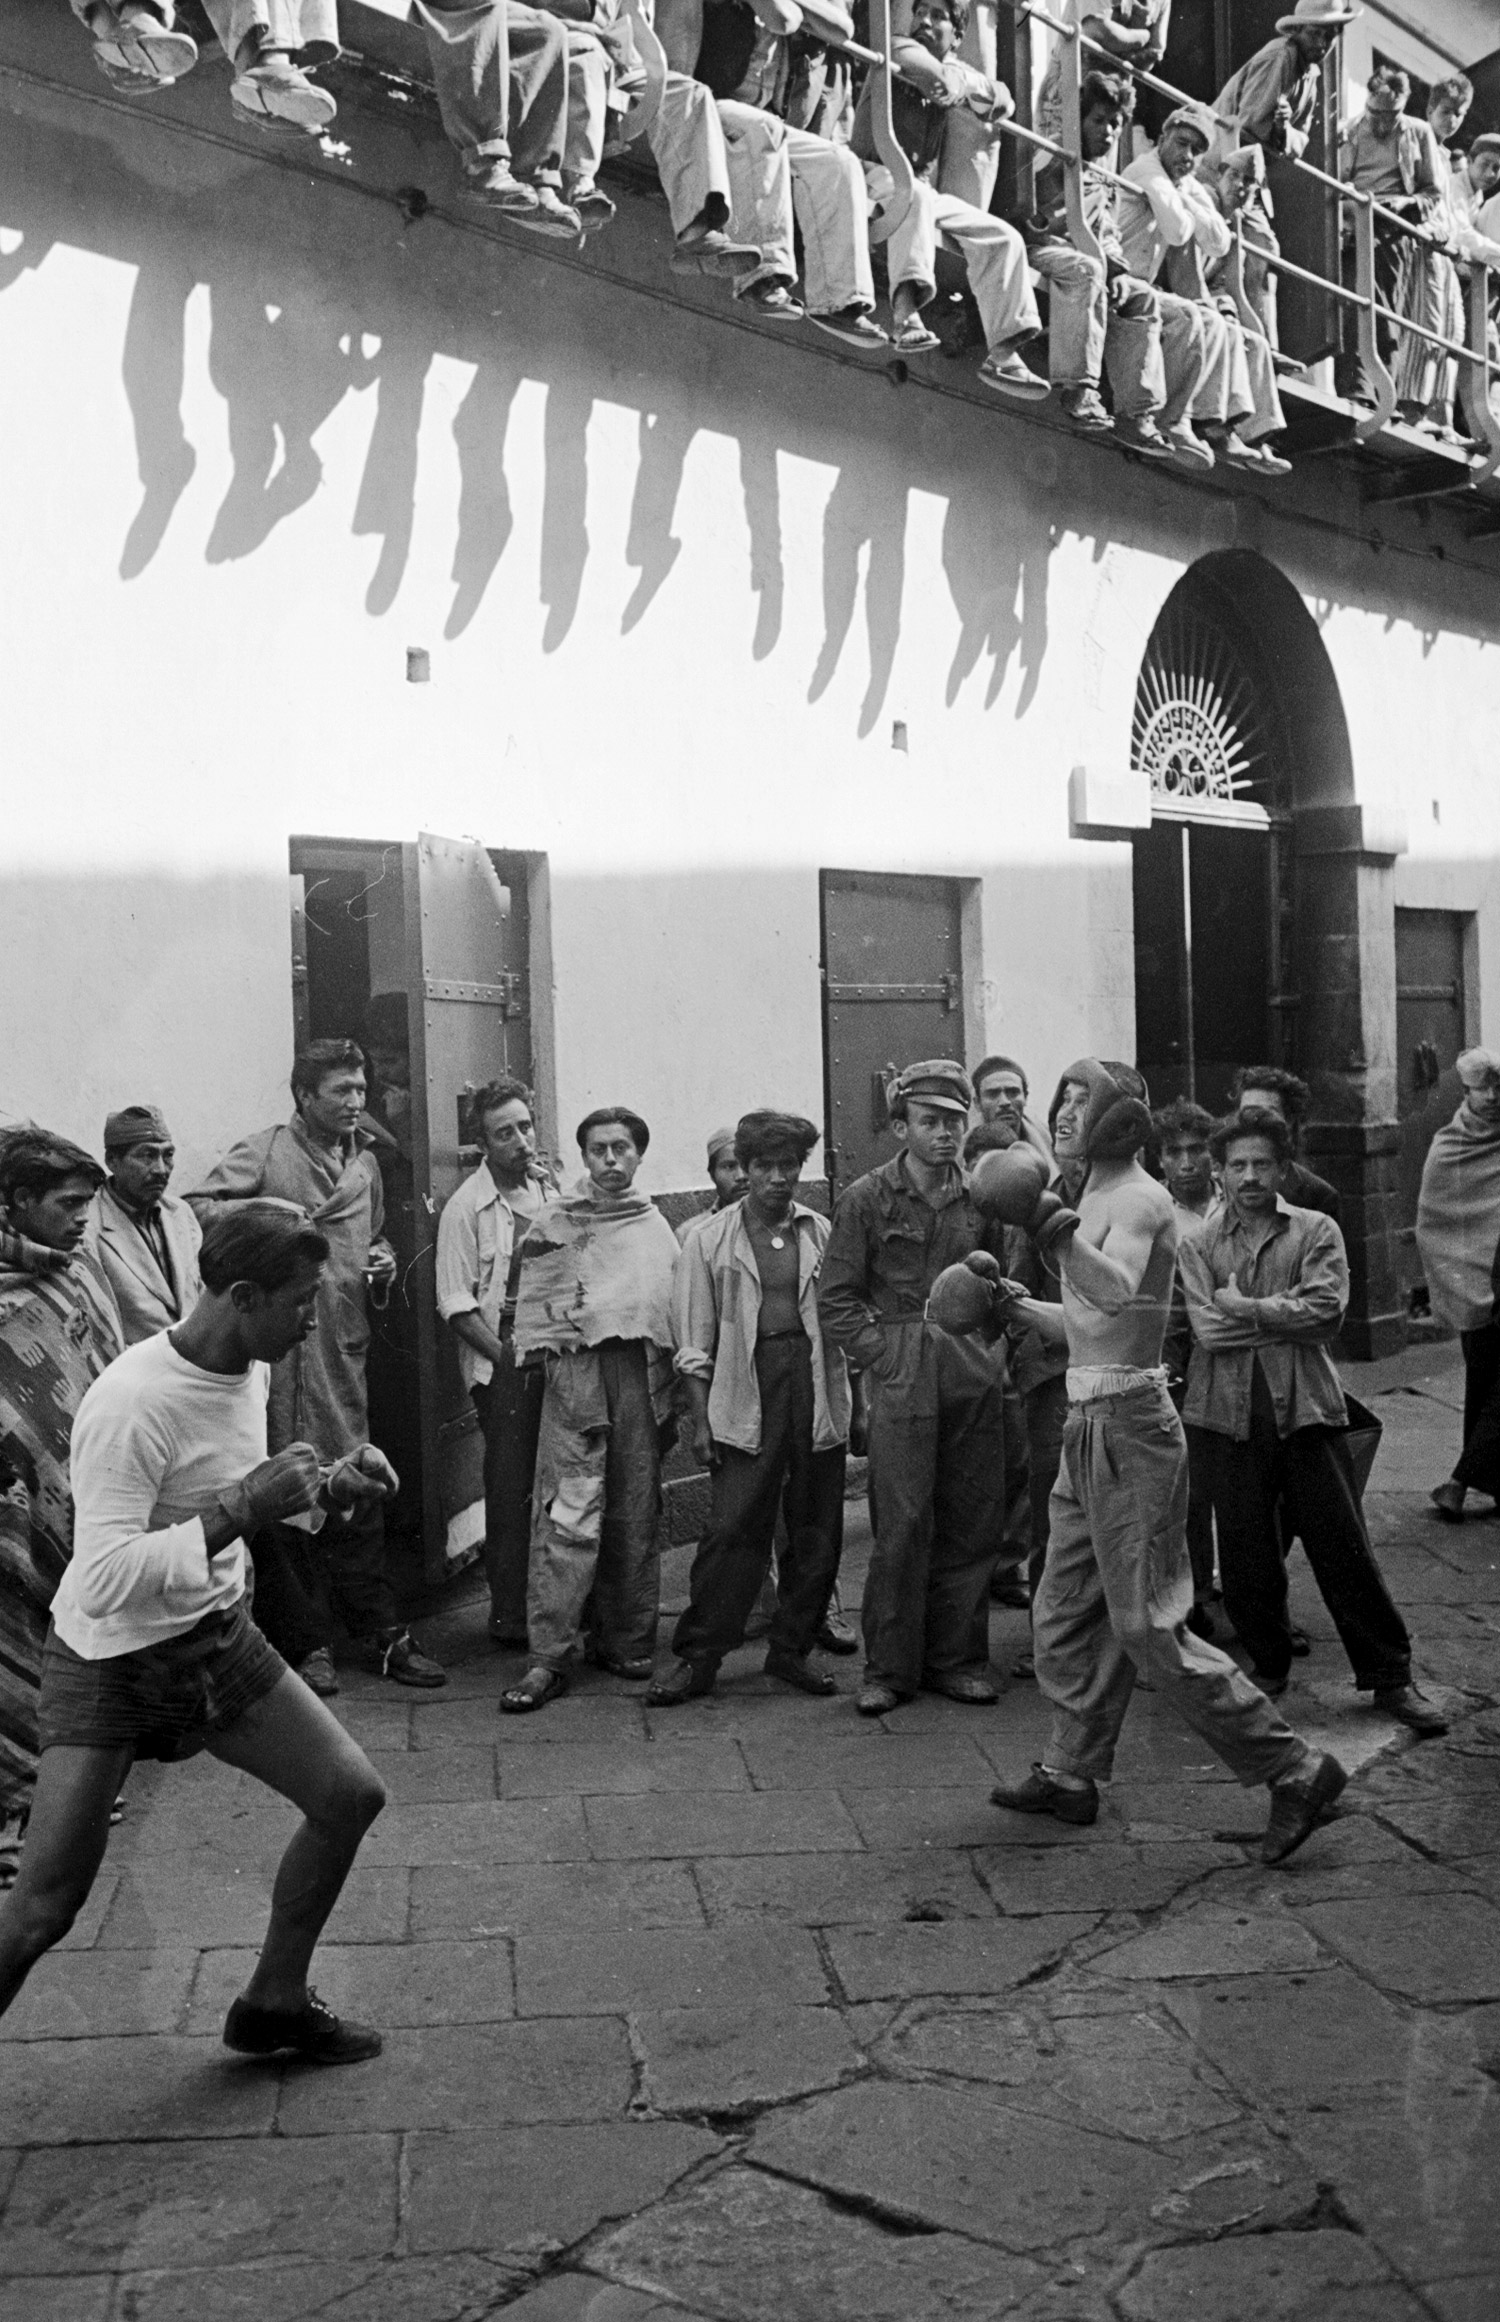 Inside the Black Palace prison in Mexico, 1950.